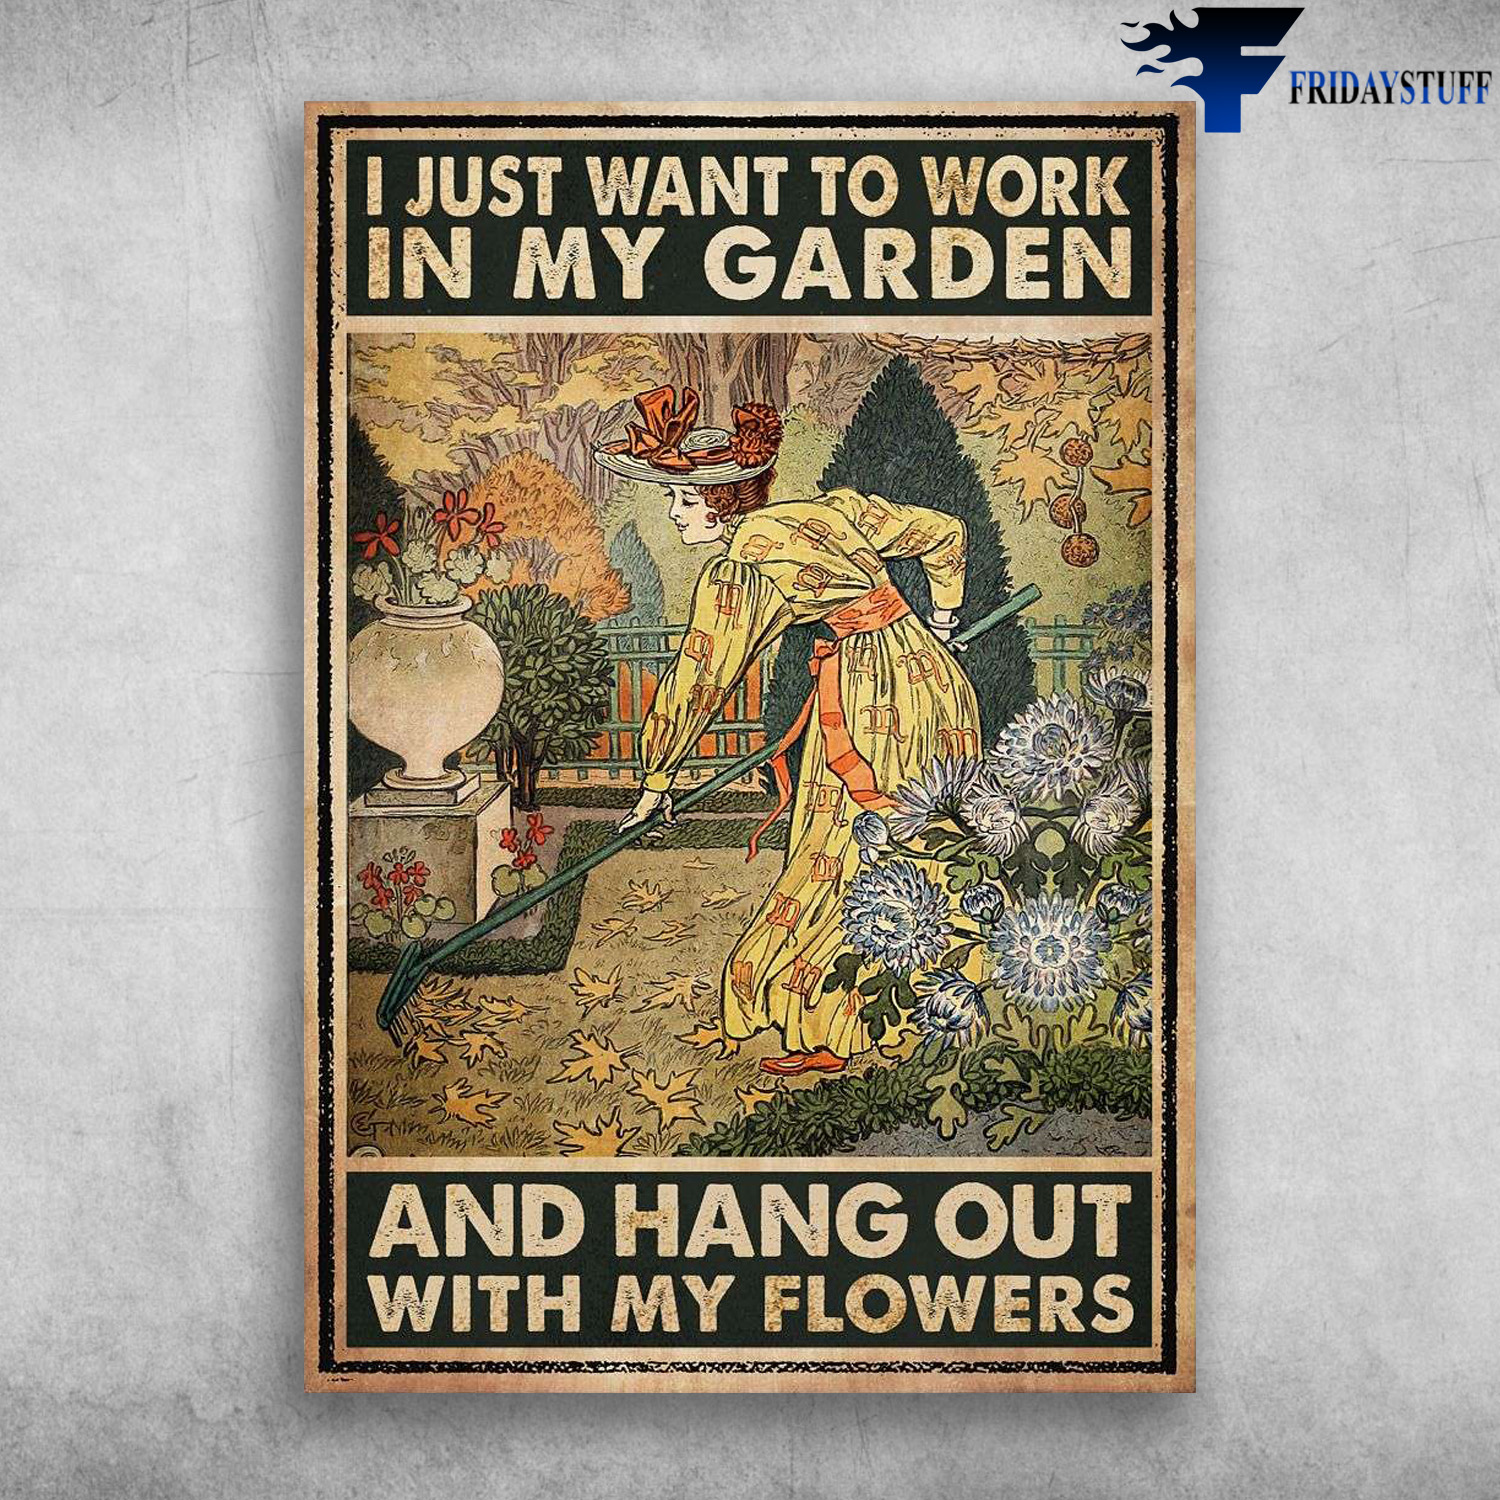 Gardening Girl - I Just Want To Work In My Garden, And Hang Out With My Flowers